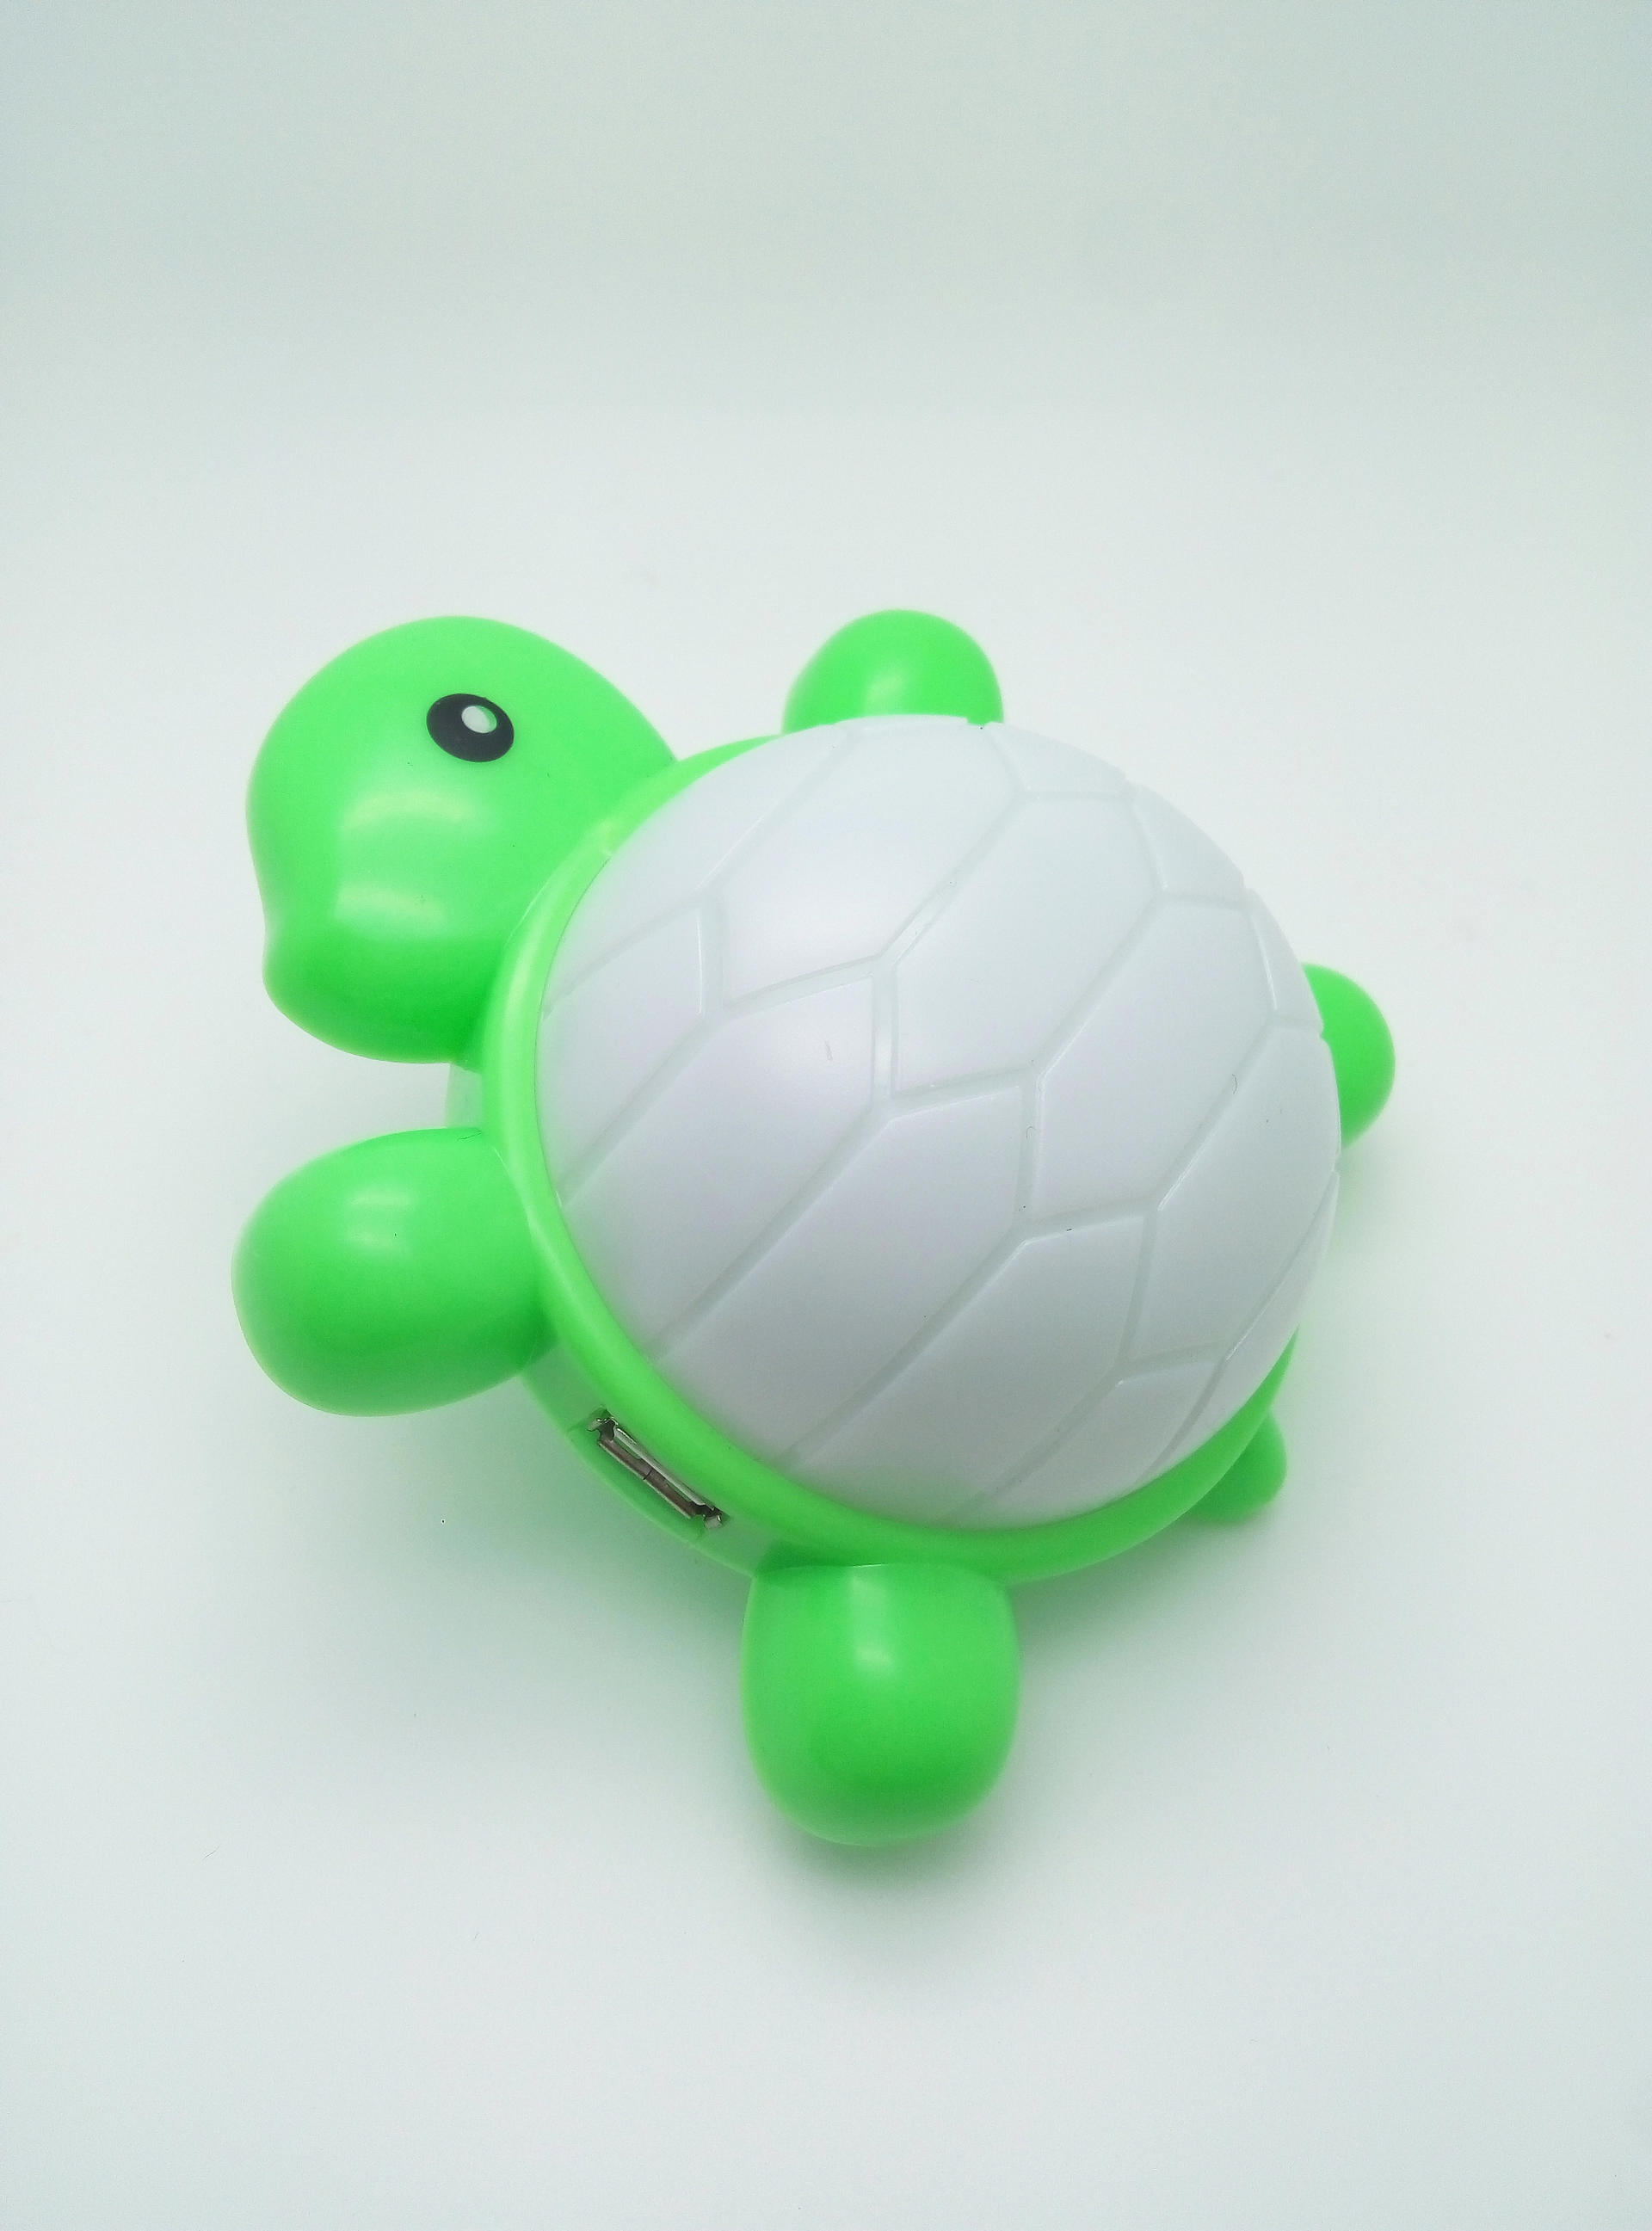 GL-W024 OEM best choice Cartoon turtle wall lamp with USB outlet plug-in night light